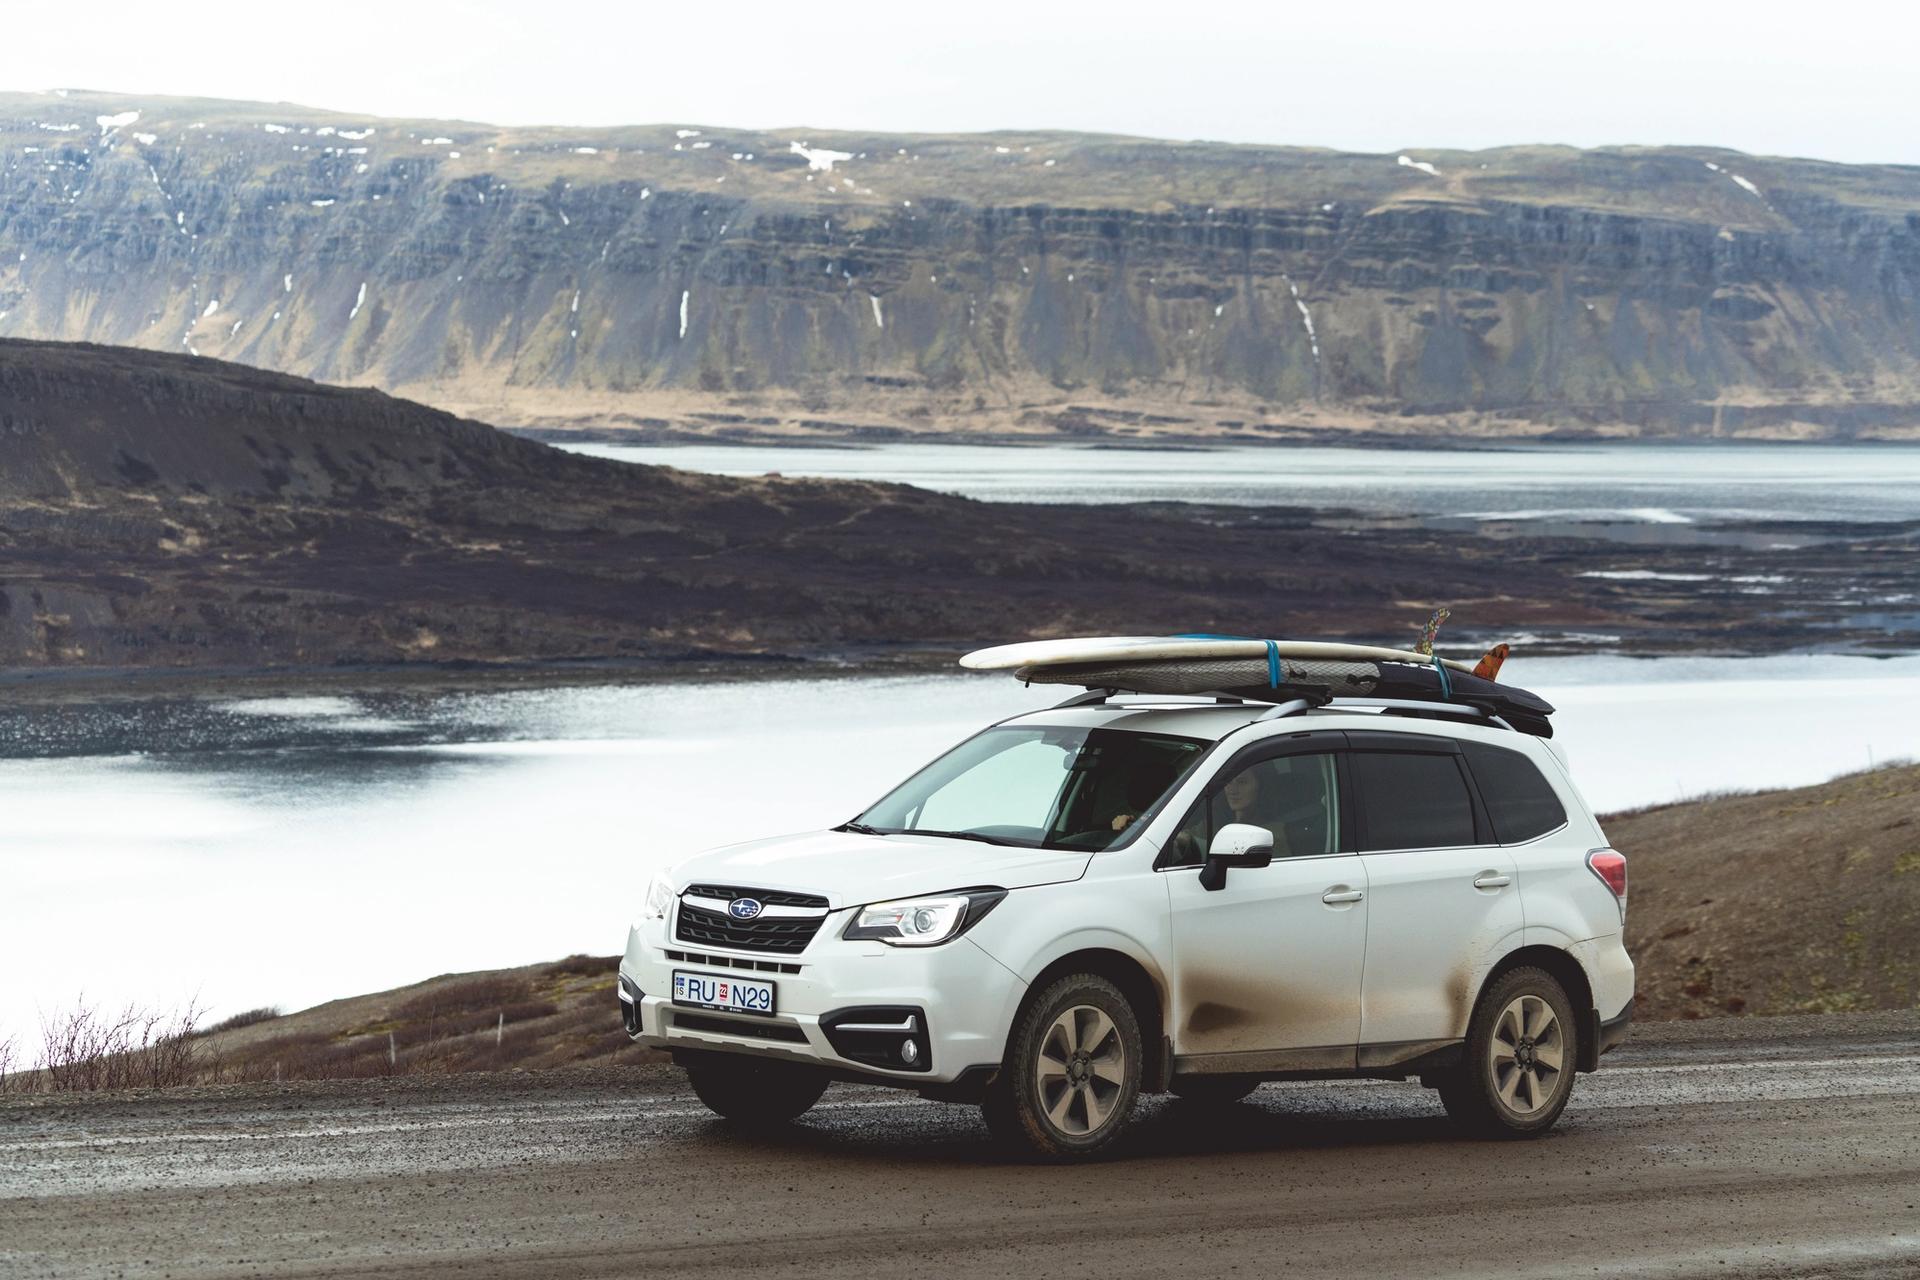 A Subaru Forester on a road in Iceland with a roof box